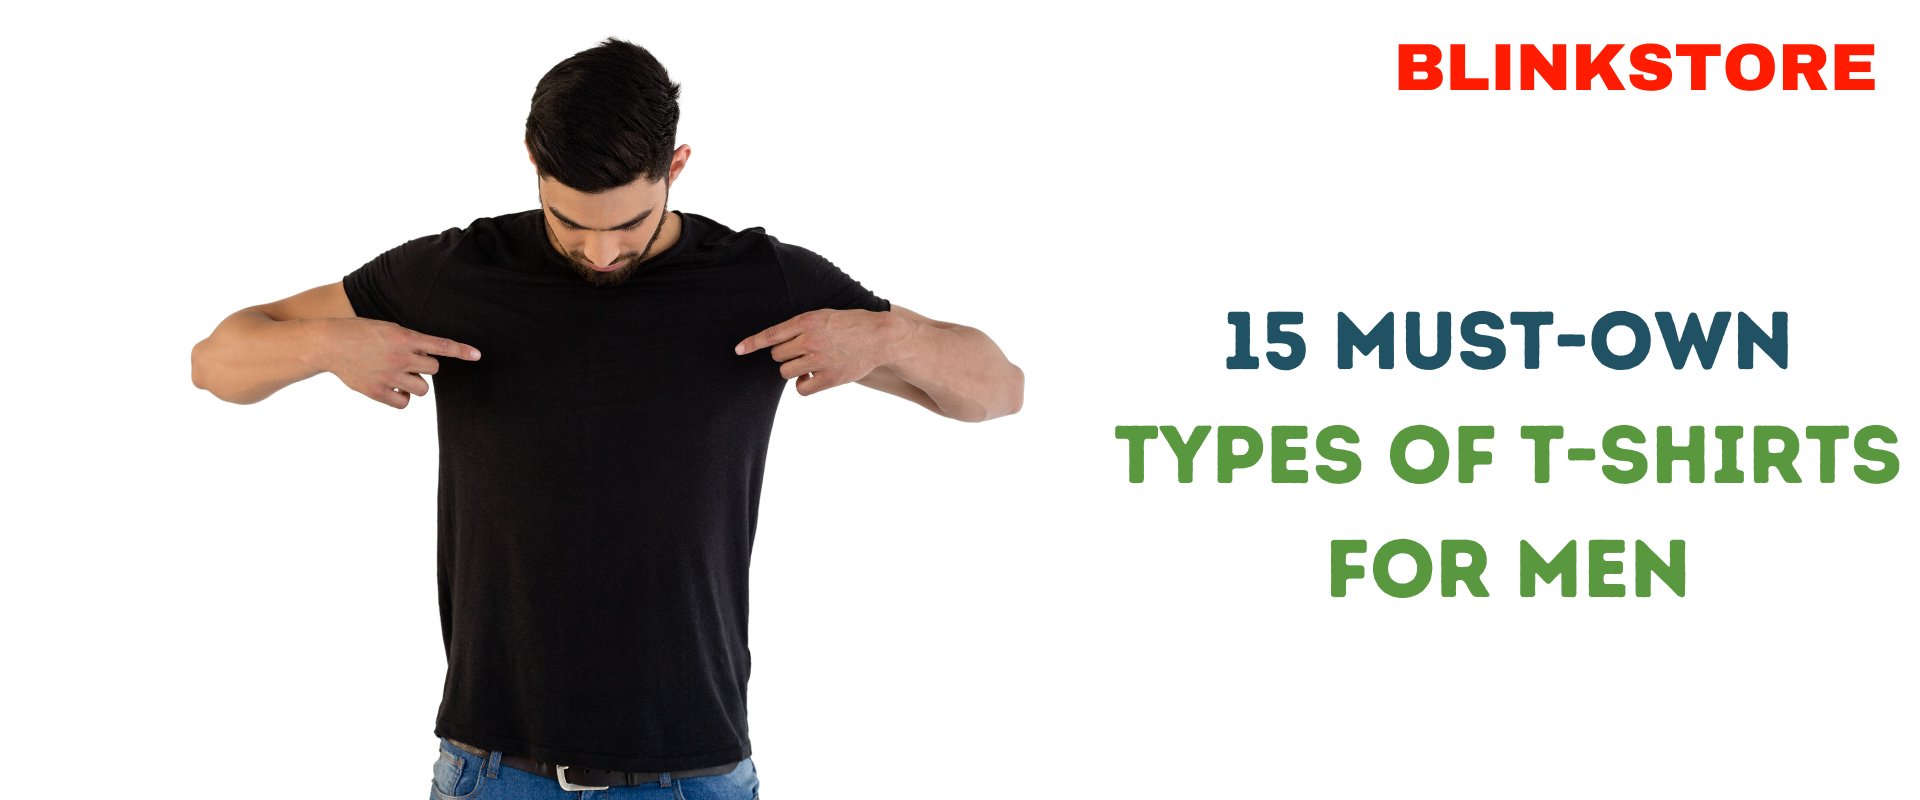 Types of T-shirts for Men